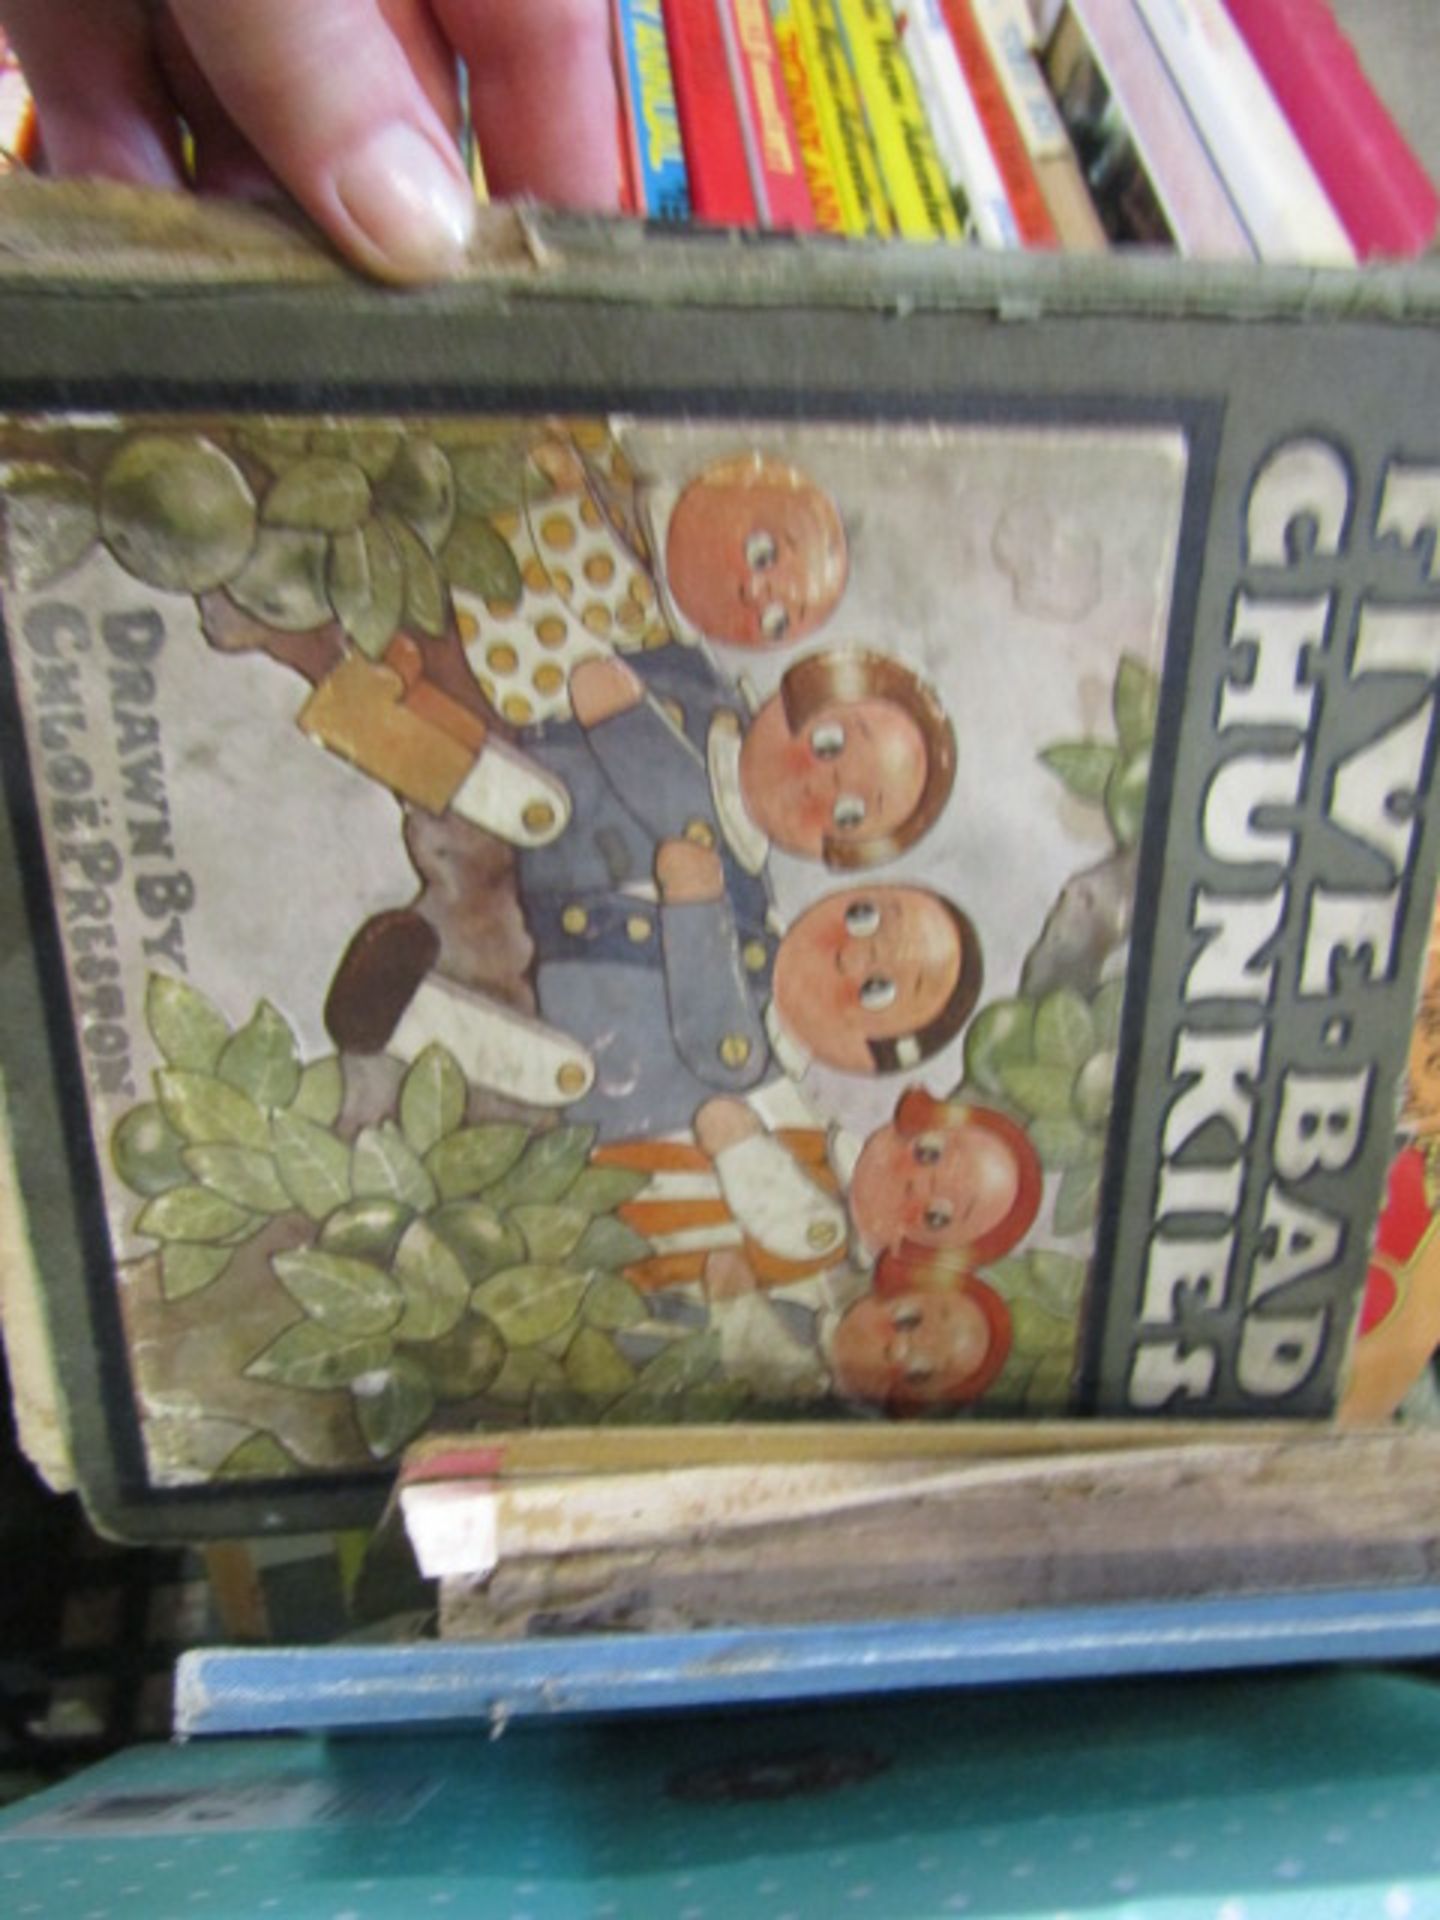 2 crates childrens annuals and books - Image 7 of 7